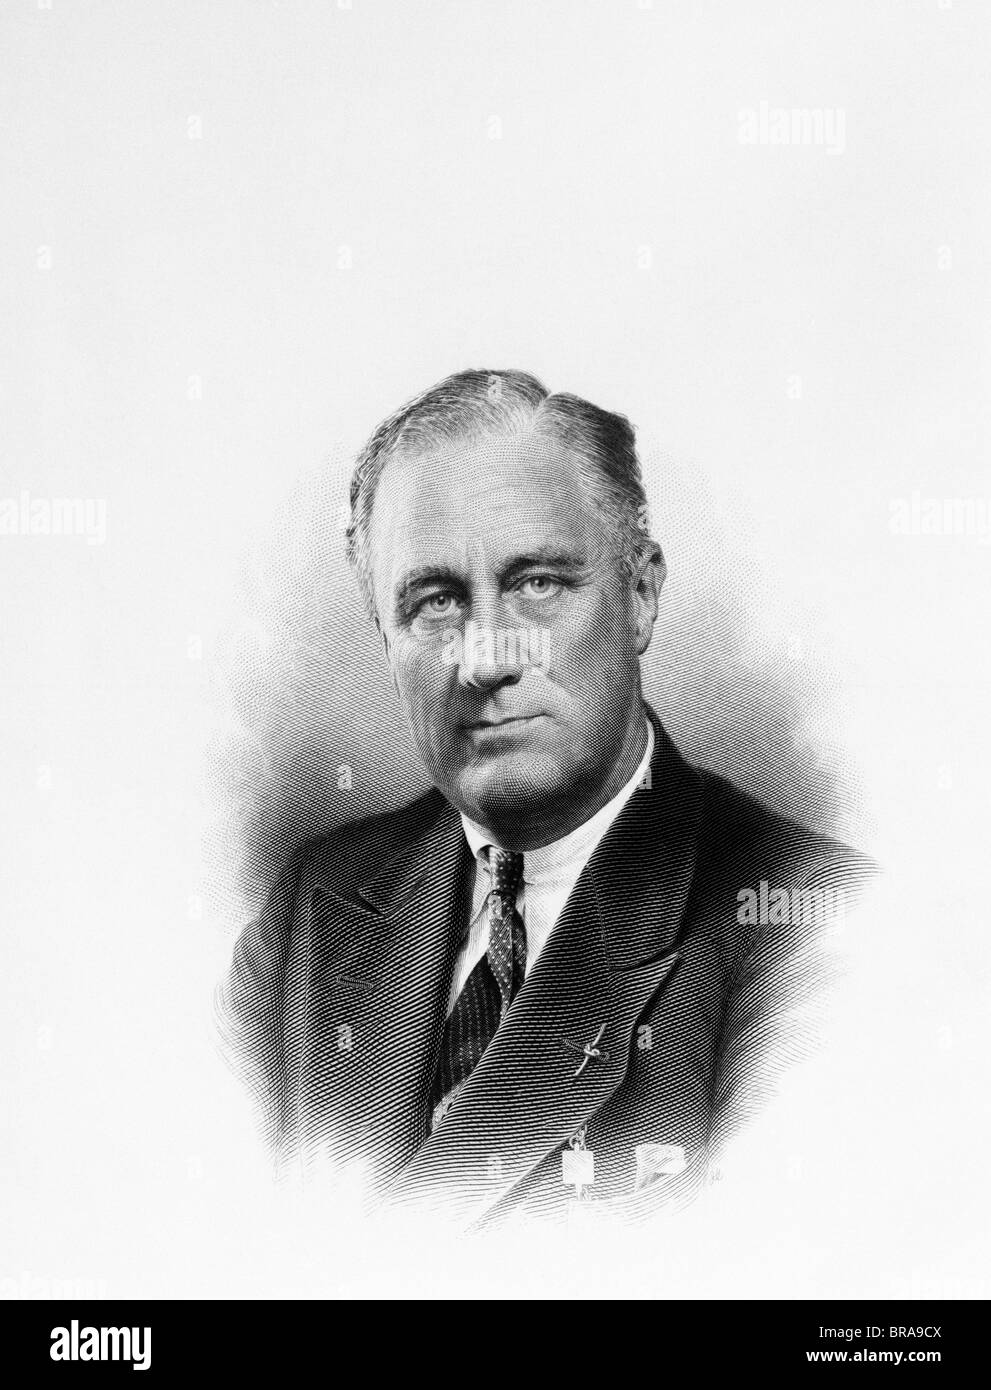 1940s SERIOUS HEAD SHOULDER PORTRAIT OF FRANKLIN DELANO ROOSEVELT 32nd AMERICAN PRESIDENT Stock Photo